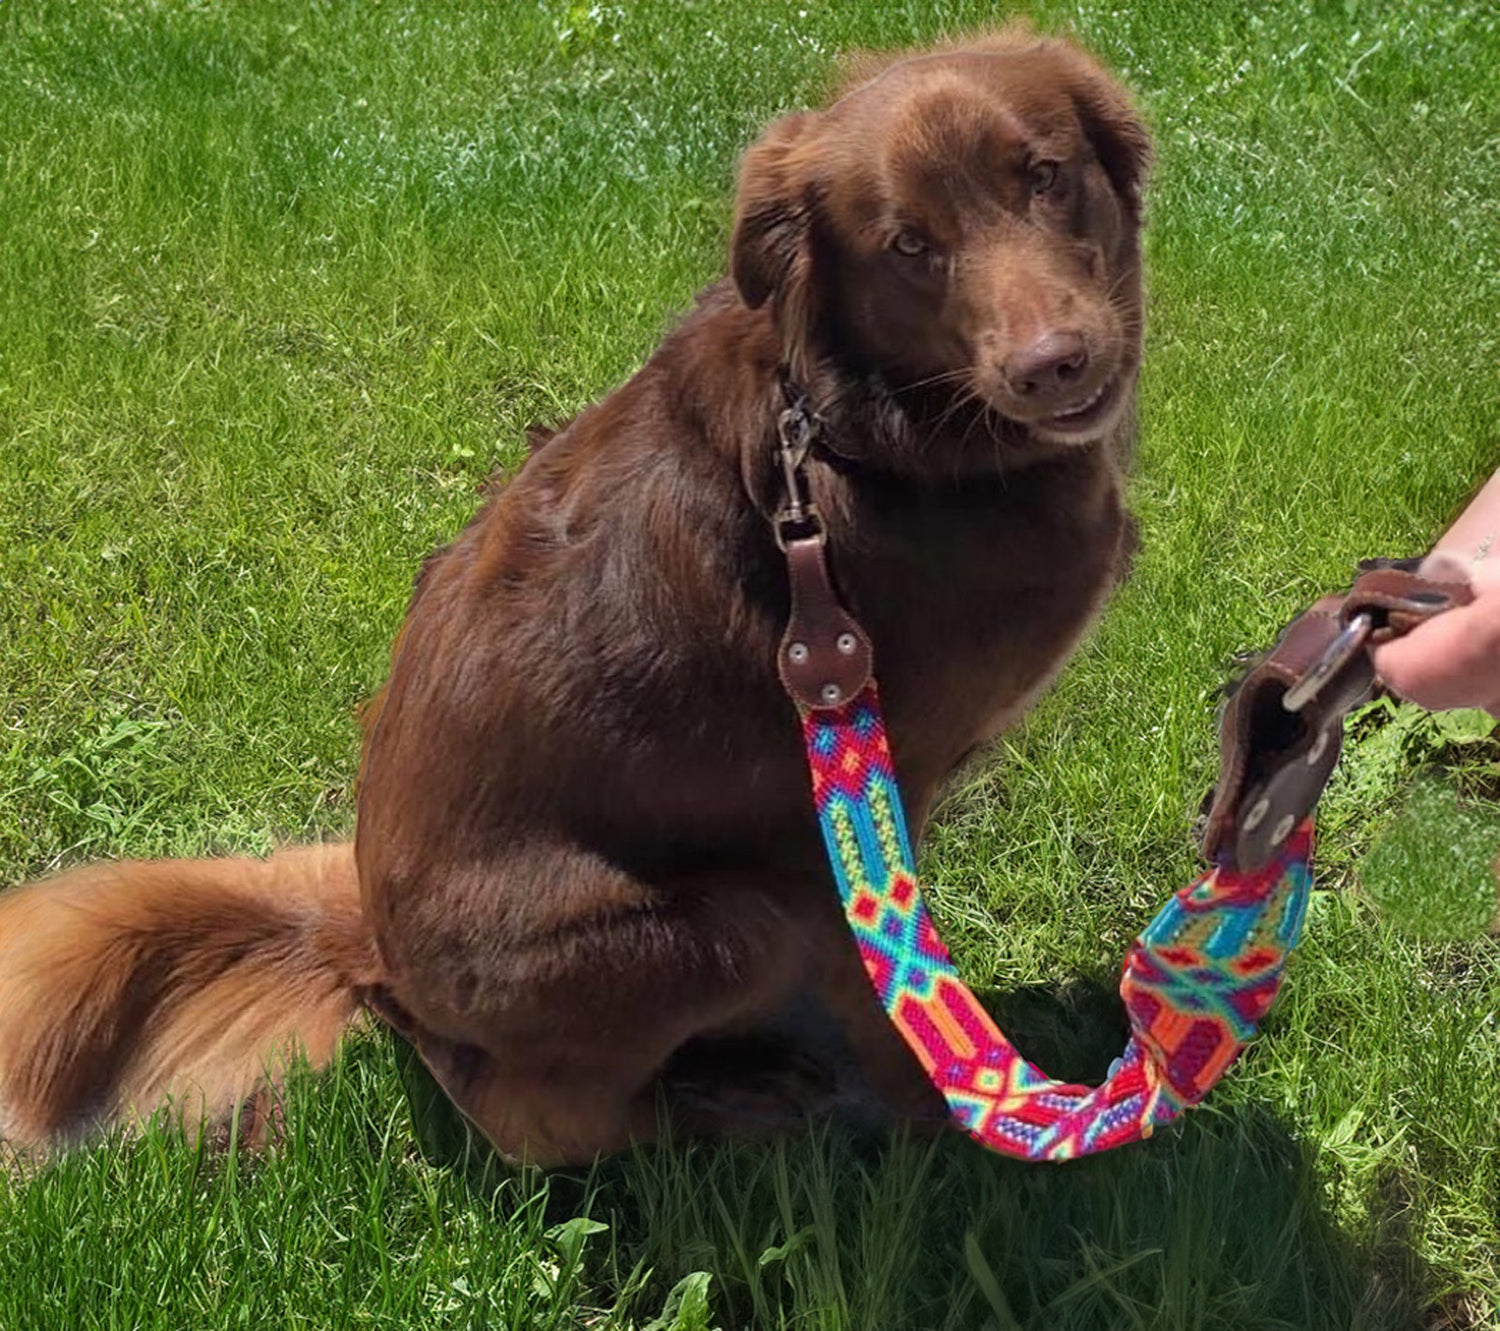  Happy pup rocking a Mexican artisanal leash with all the flair and colors of a fiesta!